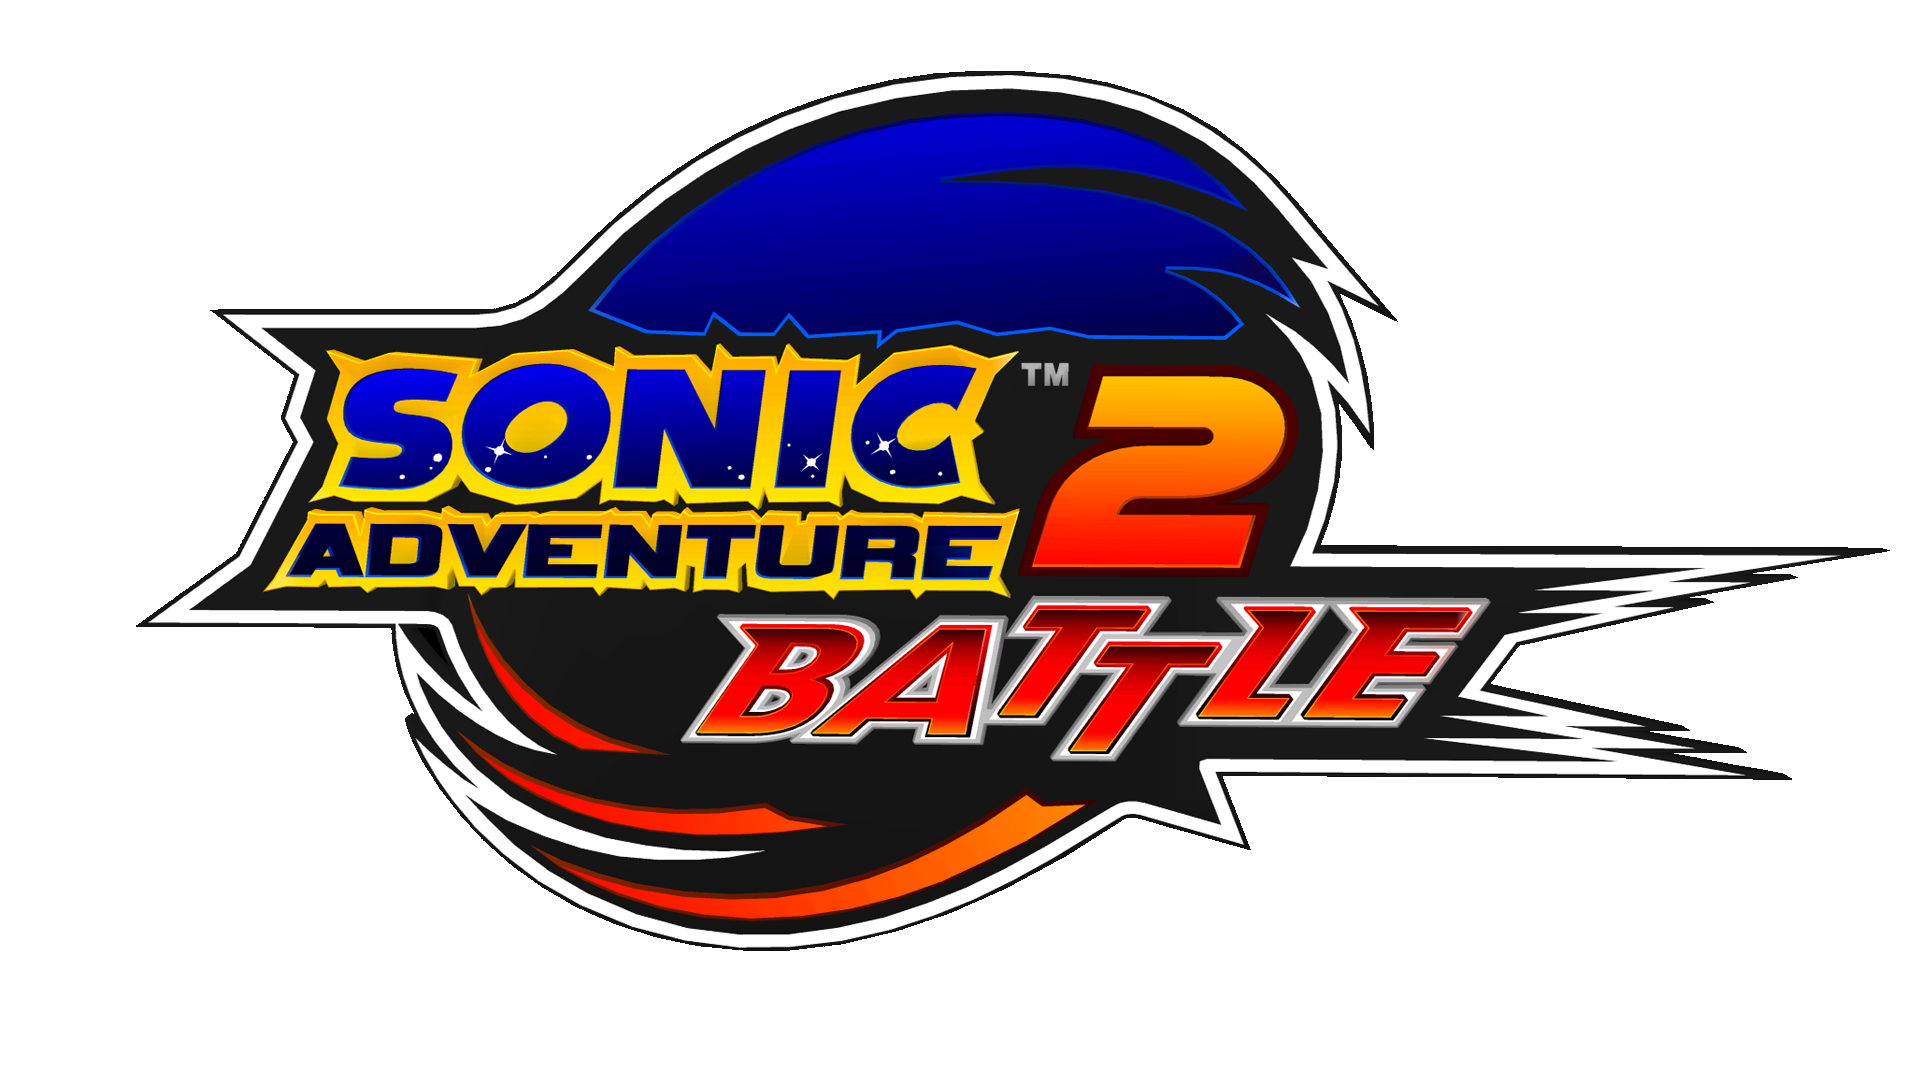 xbox 360 controller not working with sonic adventure 2 battle